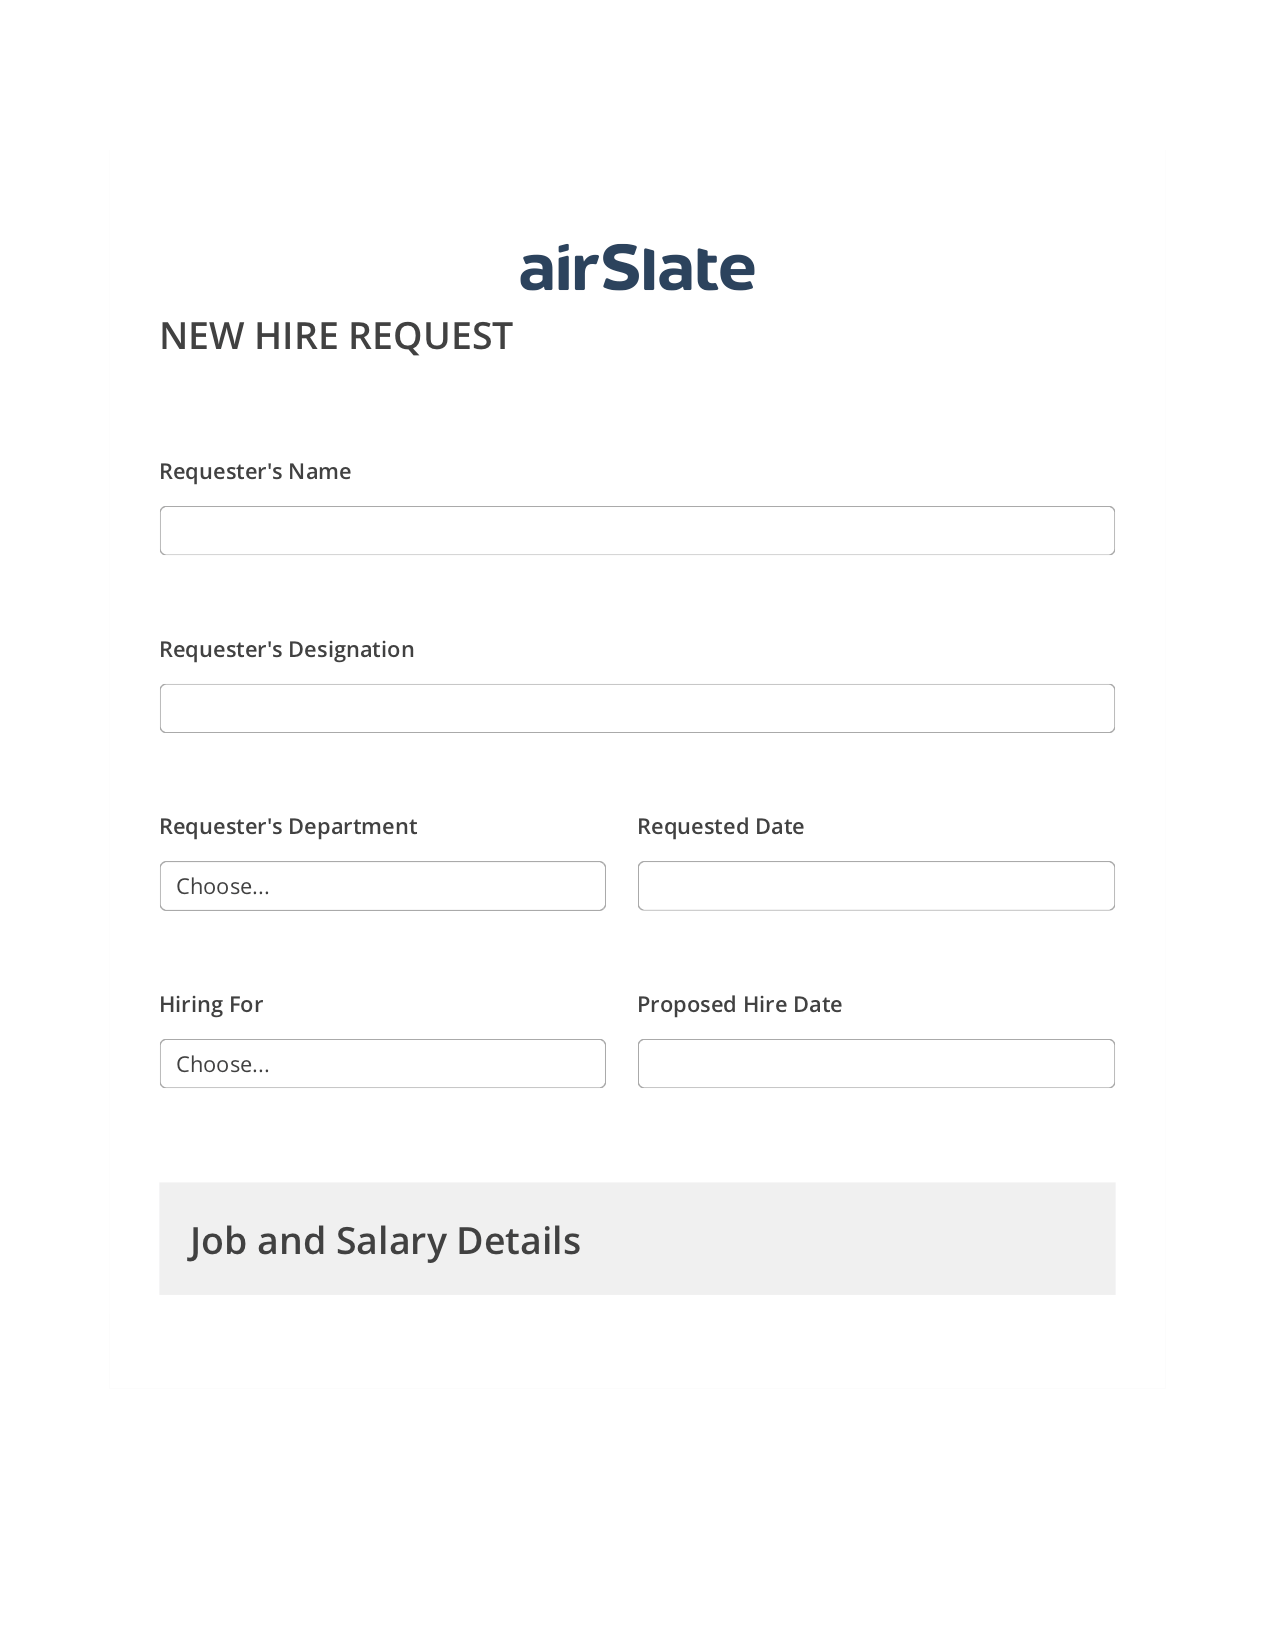 Hiring Request Workflow Pre-fill Document Bot, Add Tags to Slate Bot, Archive to Dropbox Bot